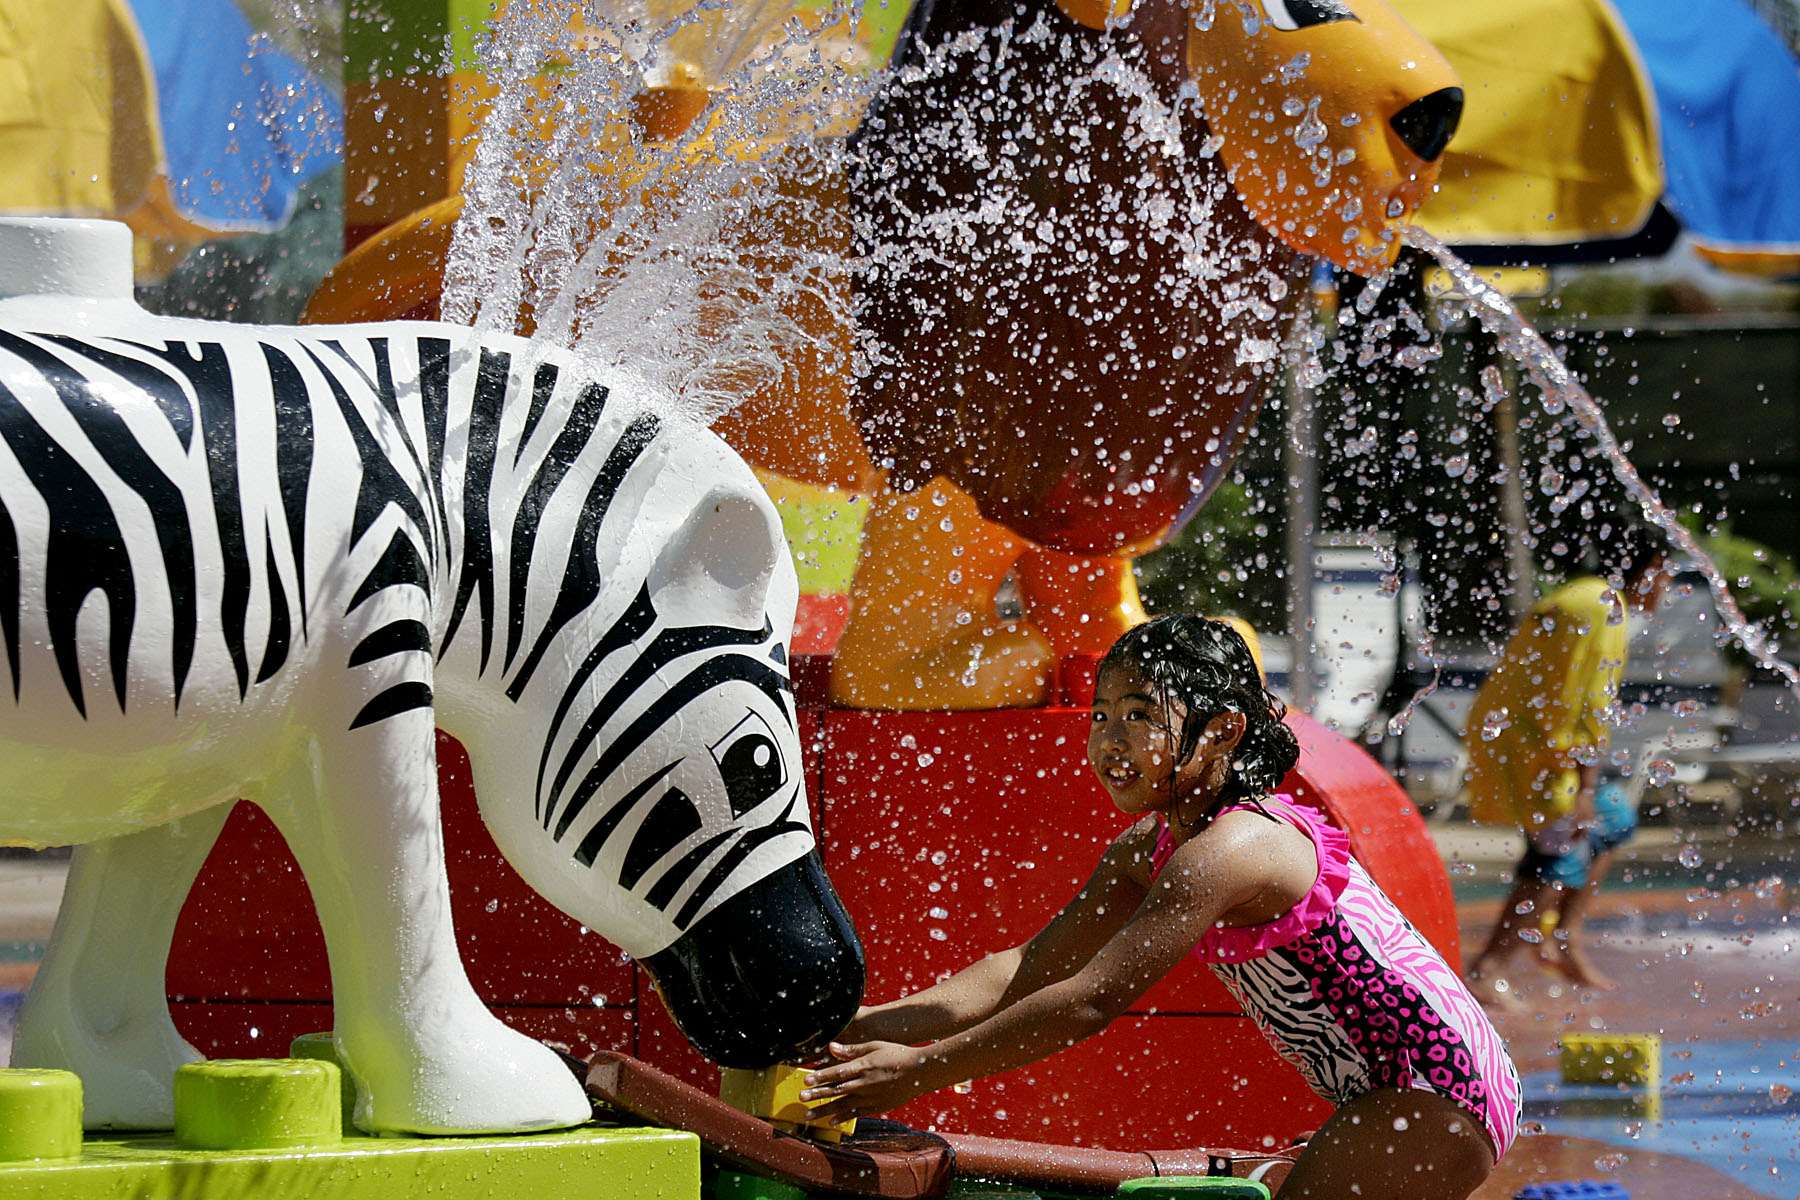 Take a break from the queues and allow the kids to make a splash on a warm day at Duplo Valley